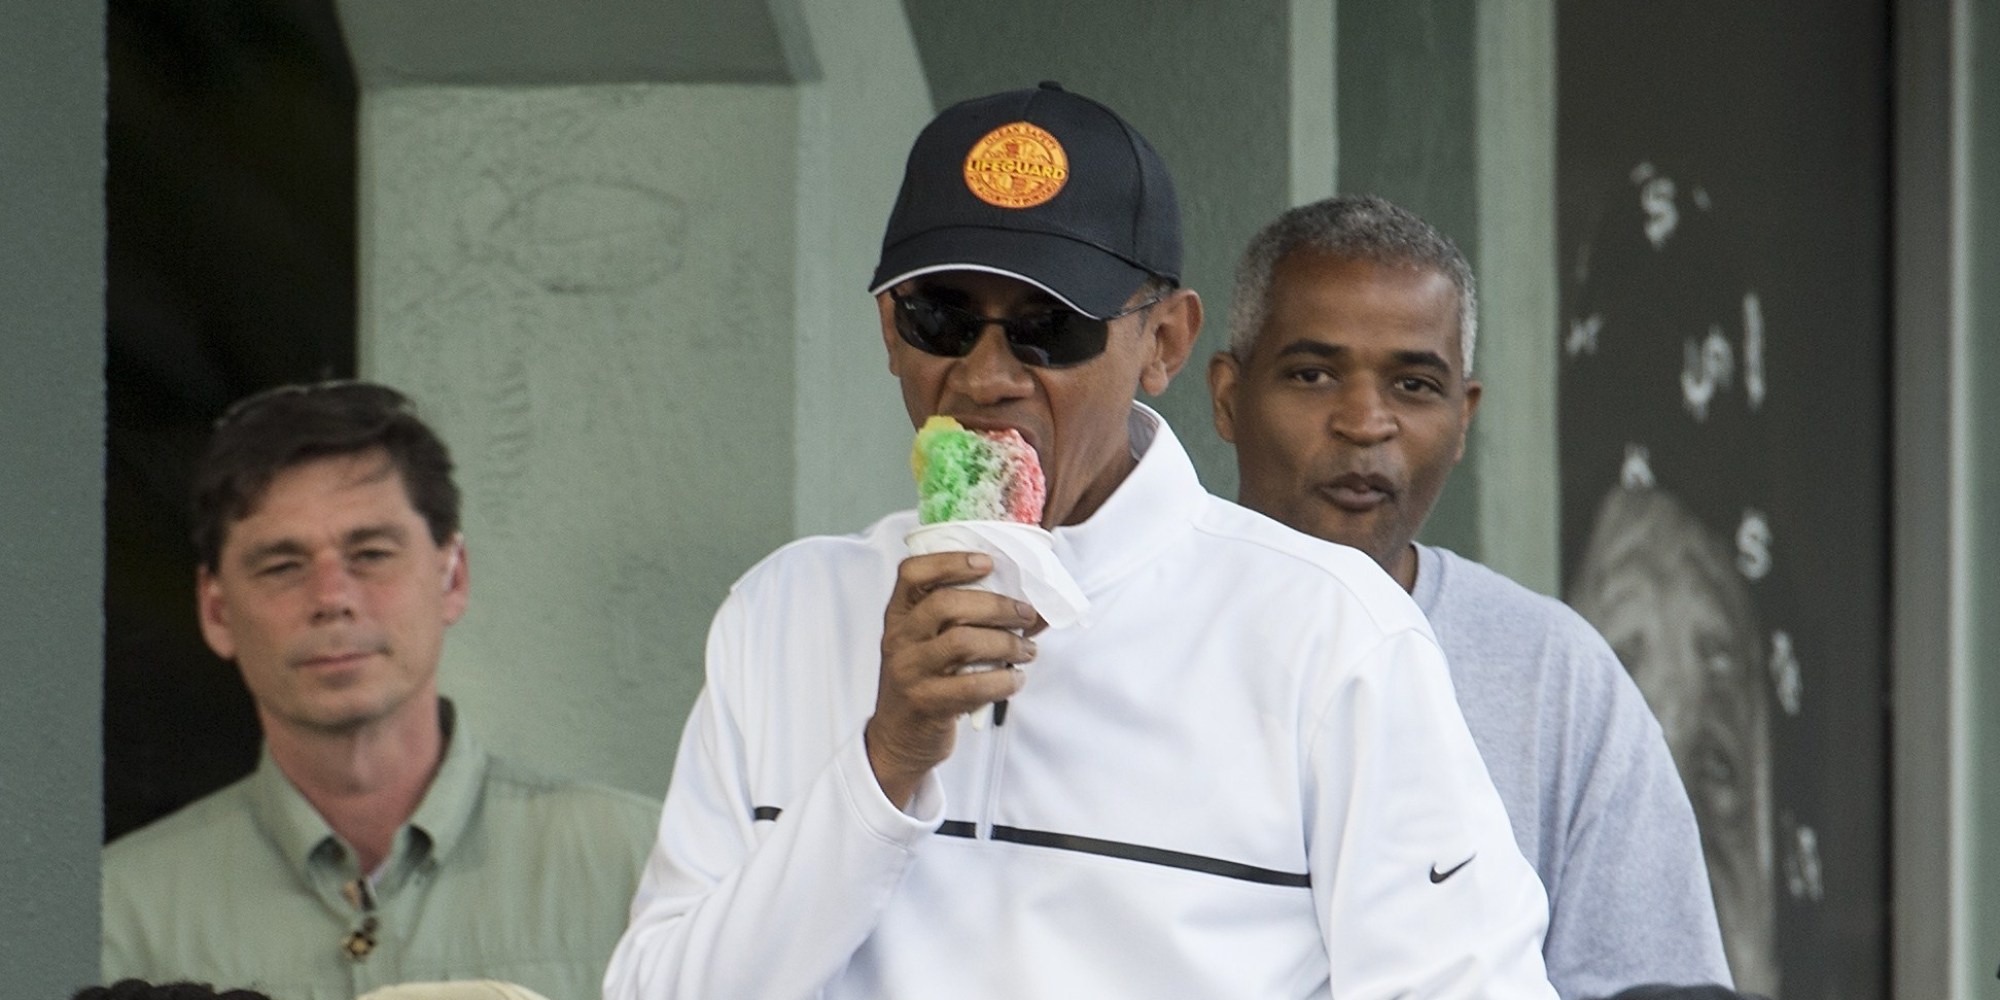 Obama Kicks Off 2015 With Shave Ice In Hawaii | HuffPost